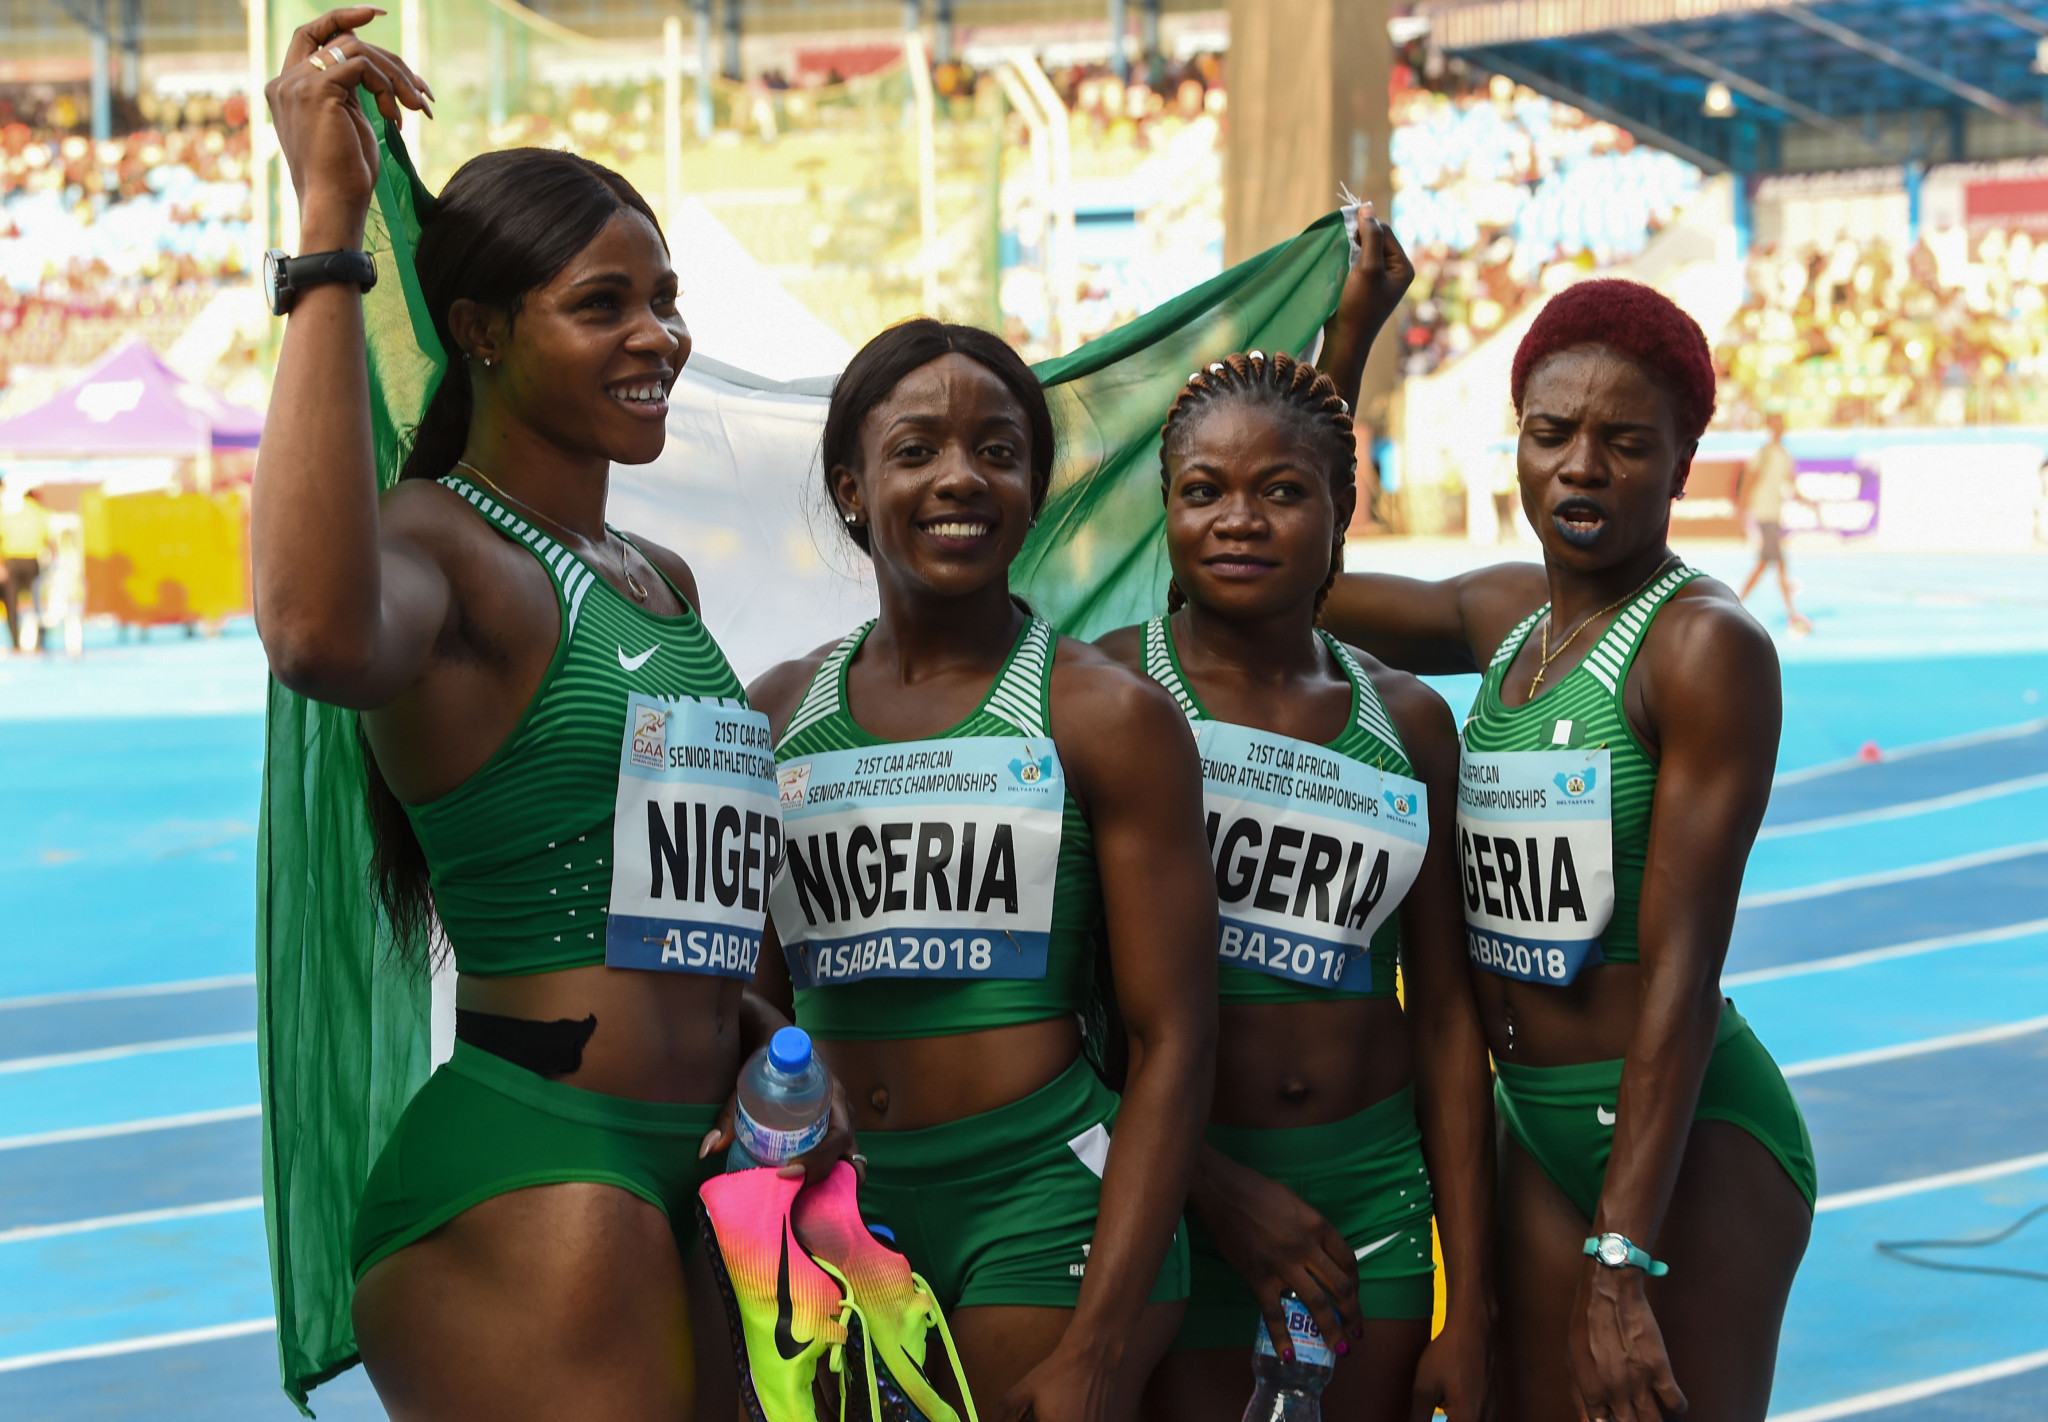 Nigeria are the reigning African and African Games champions in the women's 4x100m relay, but only two of the team selected for Tokyo 2020 have been cleared to run ©Getty Images